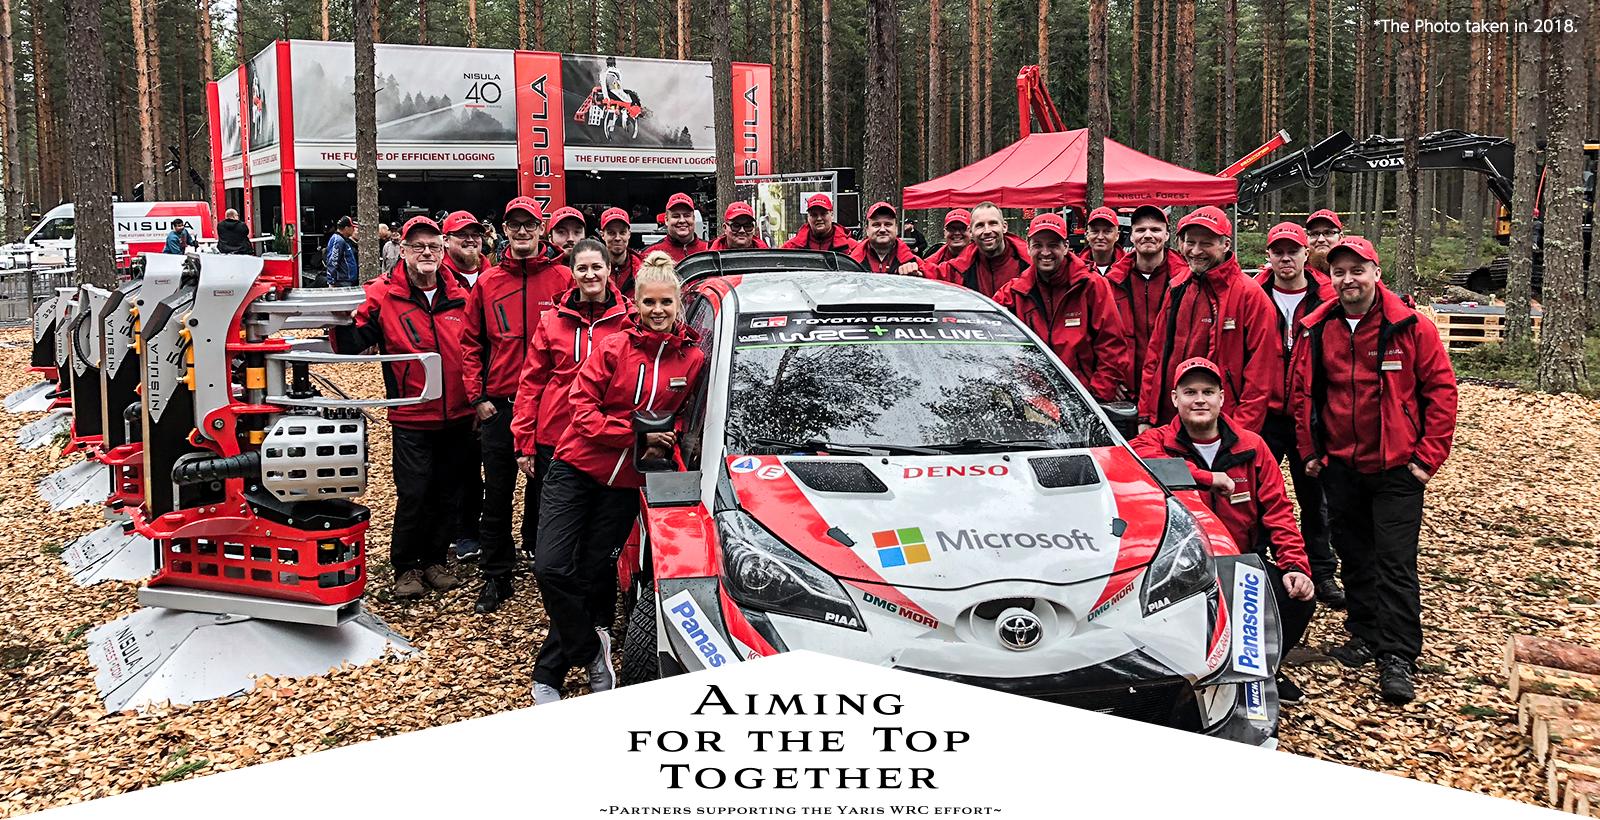 Showing off "forestry technology" through rallying in the forest - NISULA FOREST OY - | Aiming for the top together ~ Partners supporting the Yaris WRC effort ~